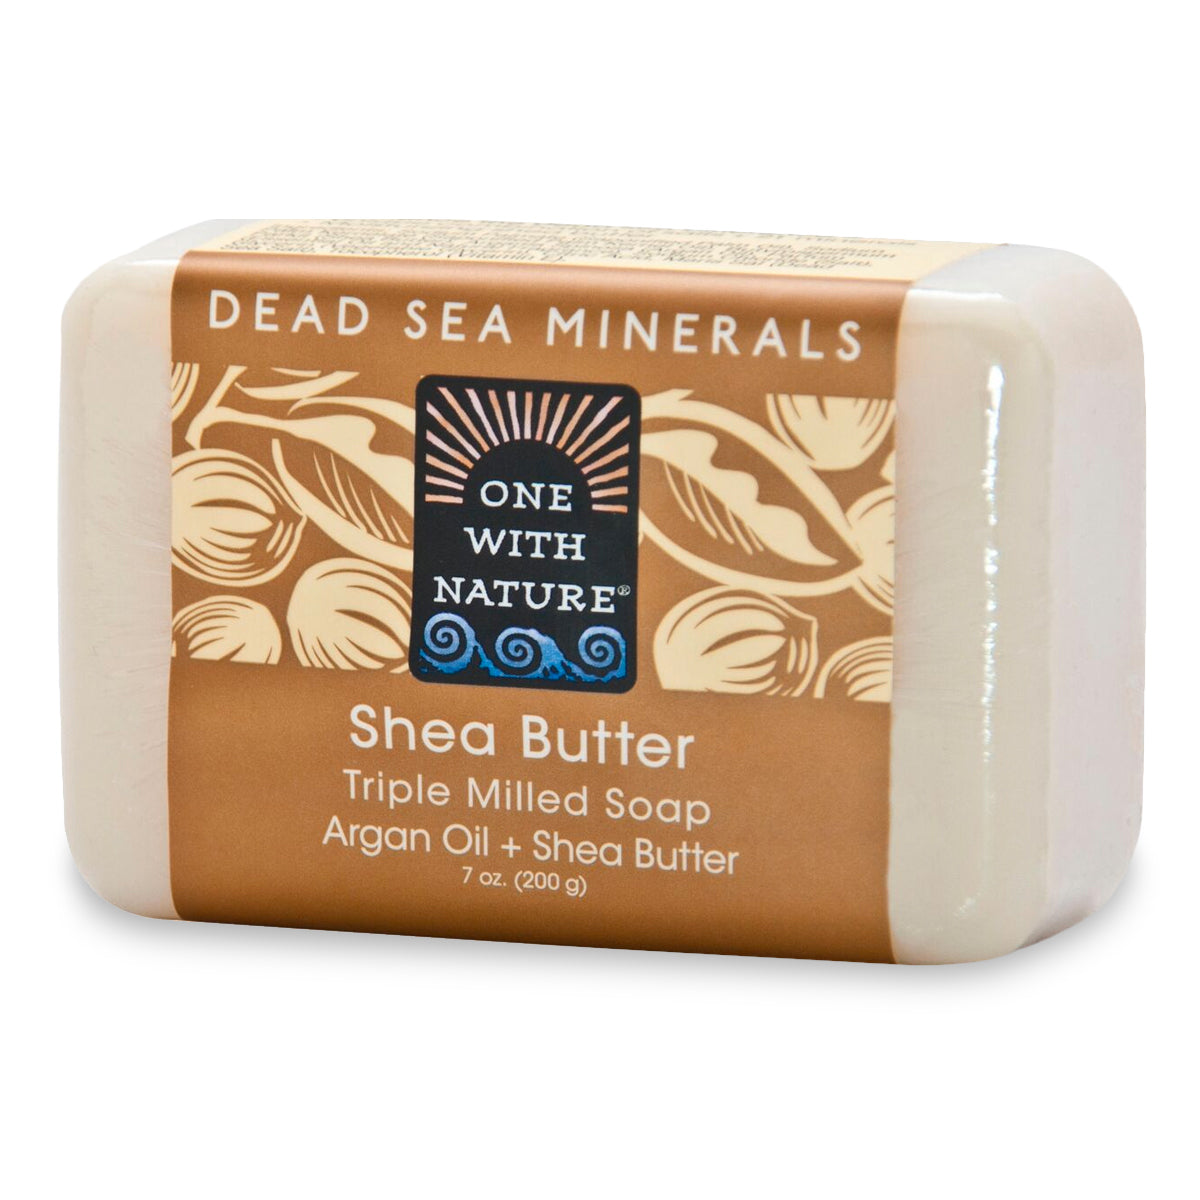 One With Nature Dead Sea Mineral Soap - Shea Butter (7 oz) #10077150 photo